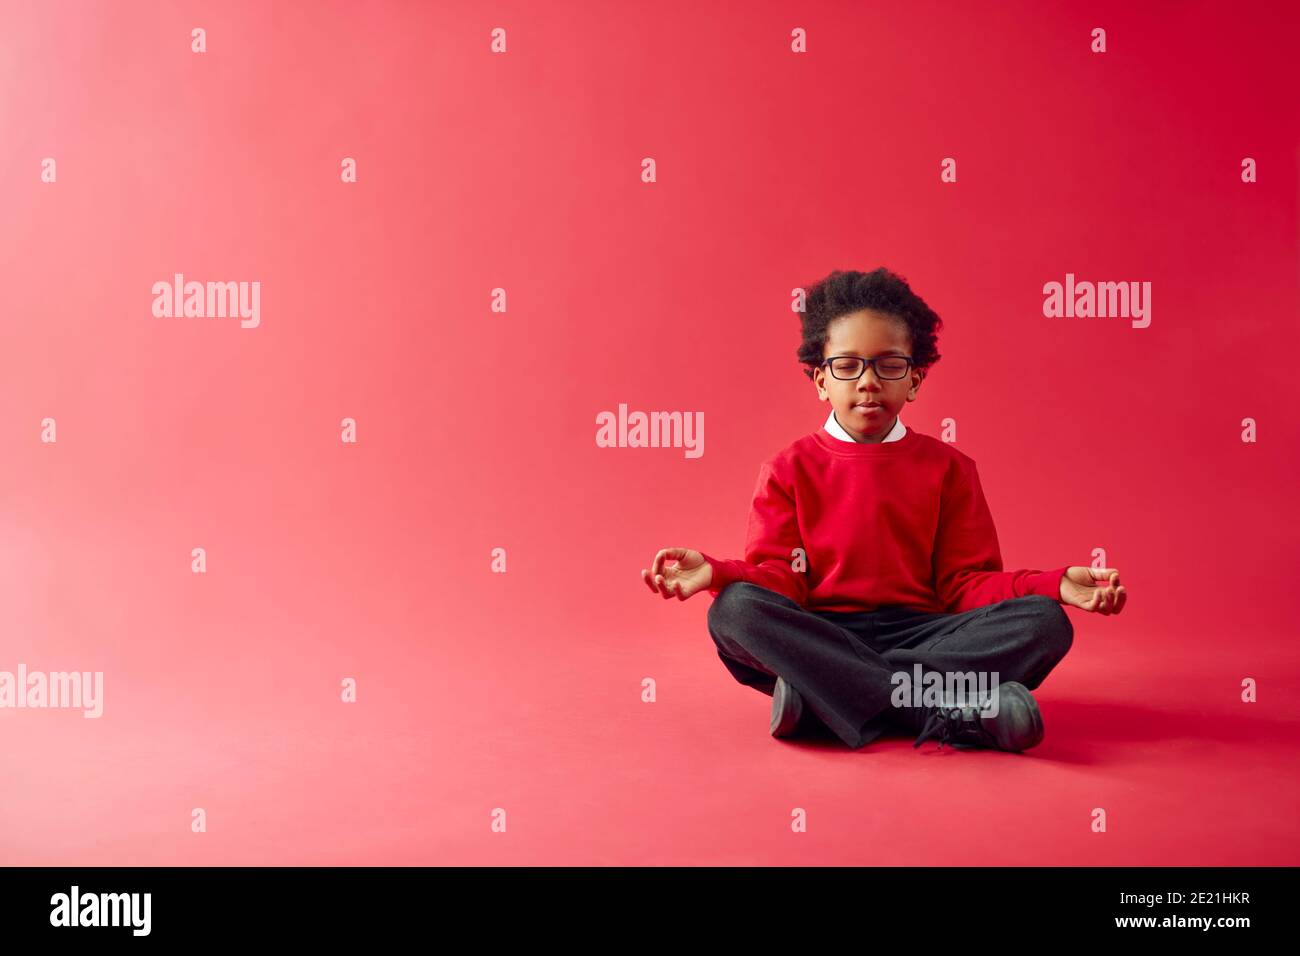 Male Elementary School Pupil Wearing Uniform Sitting And Meditating Against Red Studio Background Stock Photo